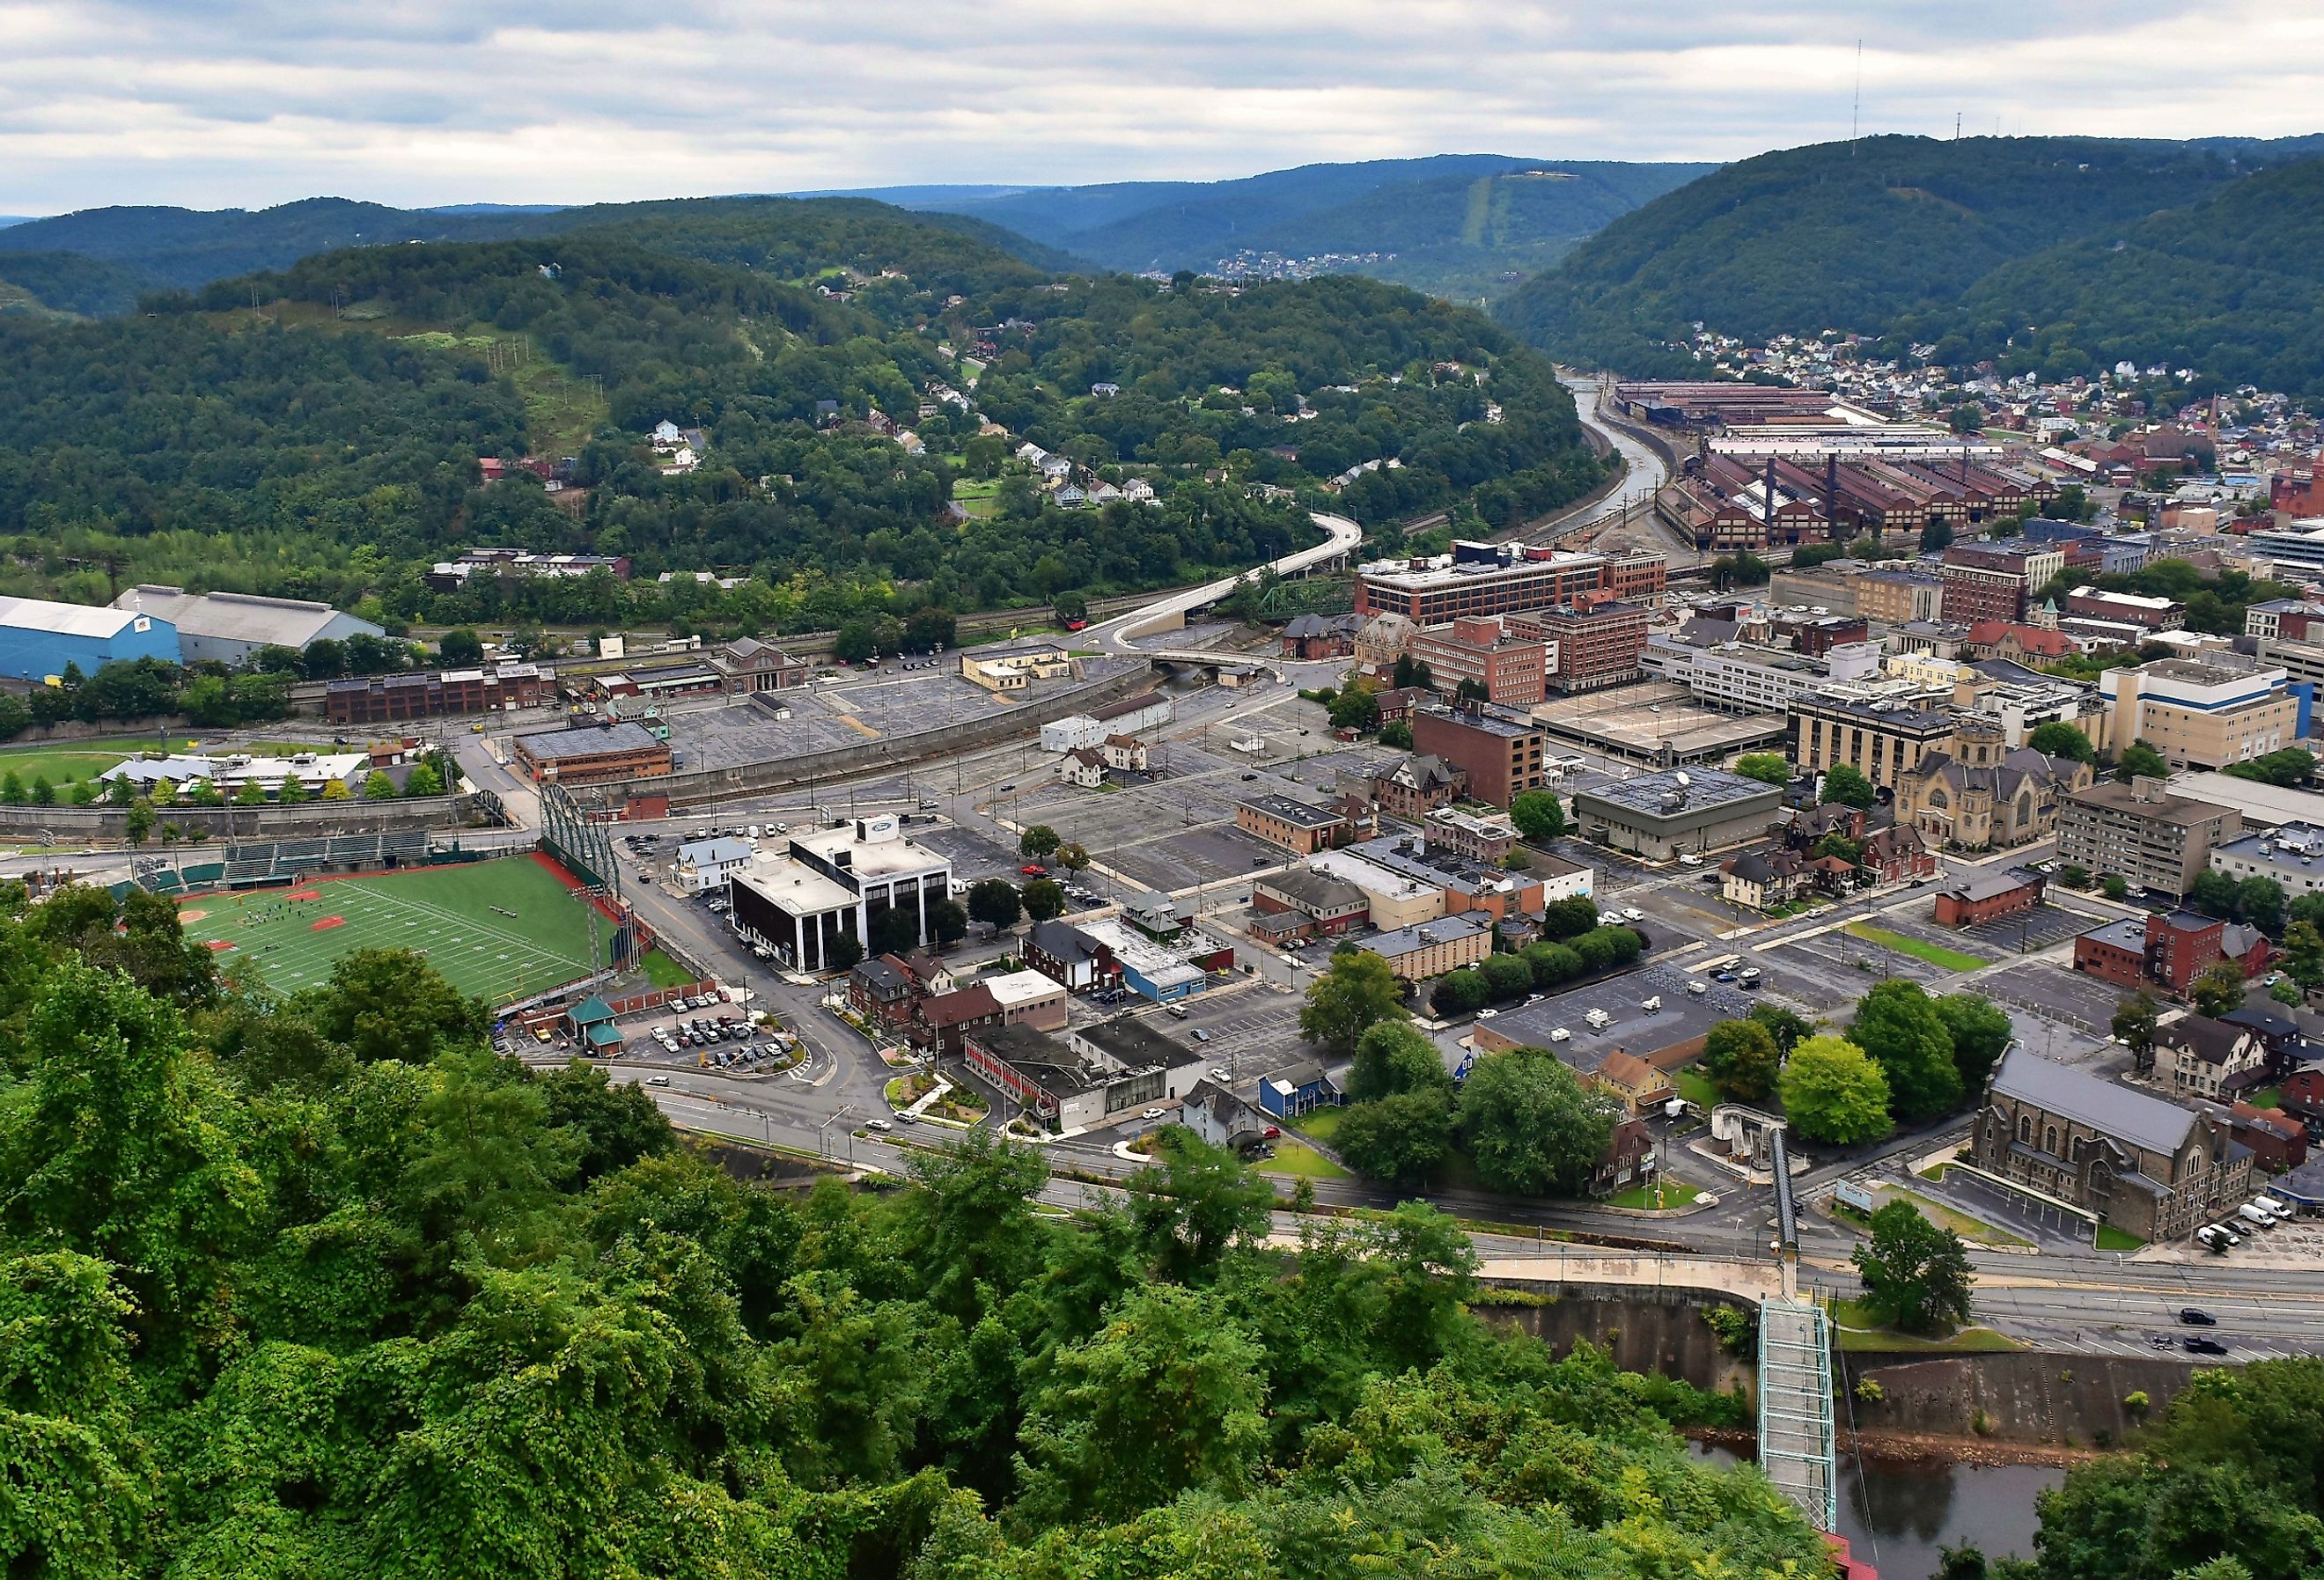 A view of Johnstown, Pennsylvania from atop the Incline Plane with green mountain tops.